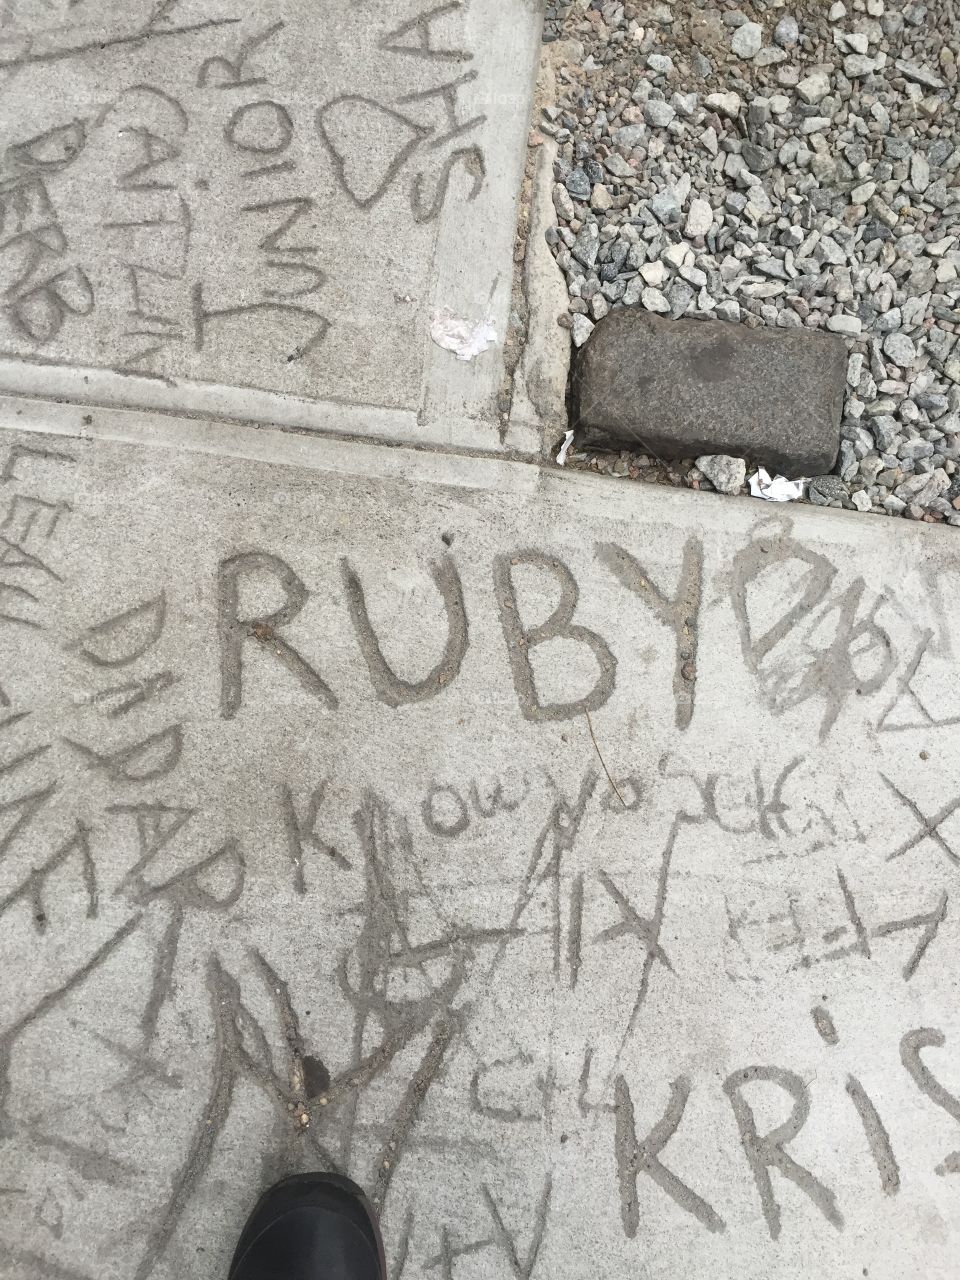 Let's draw in the cement lol